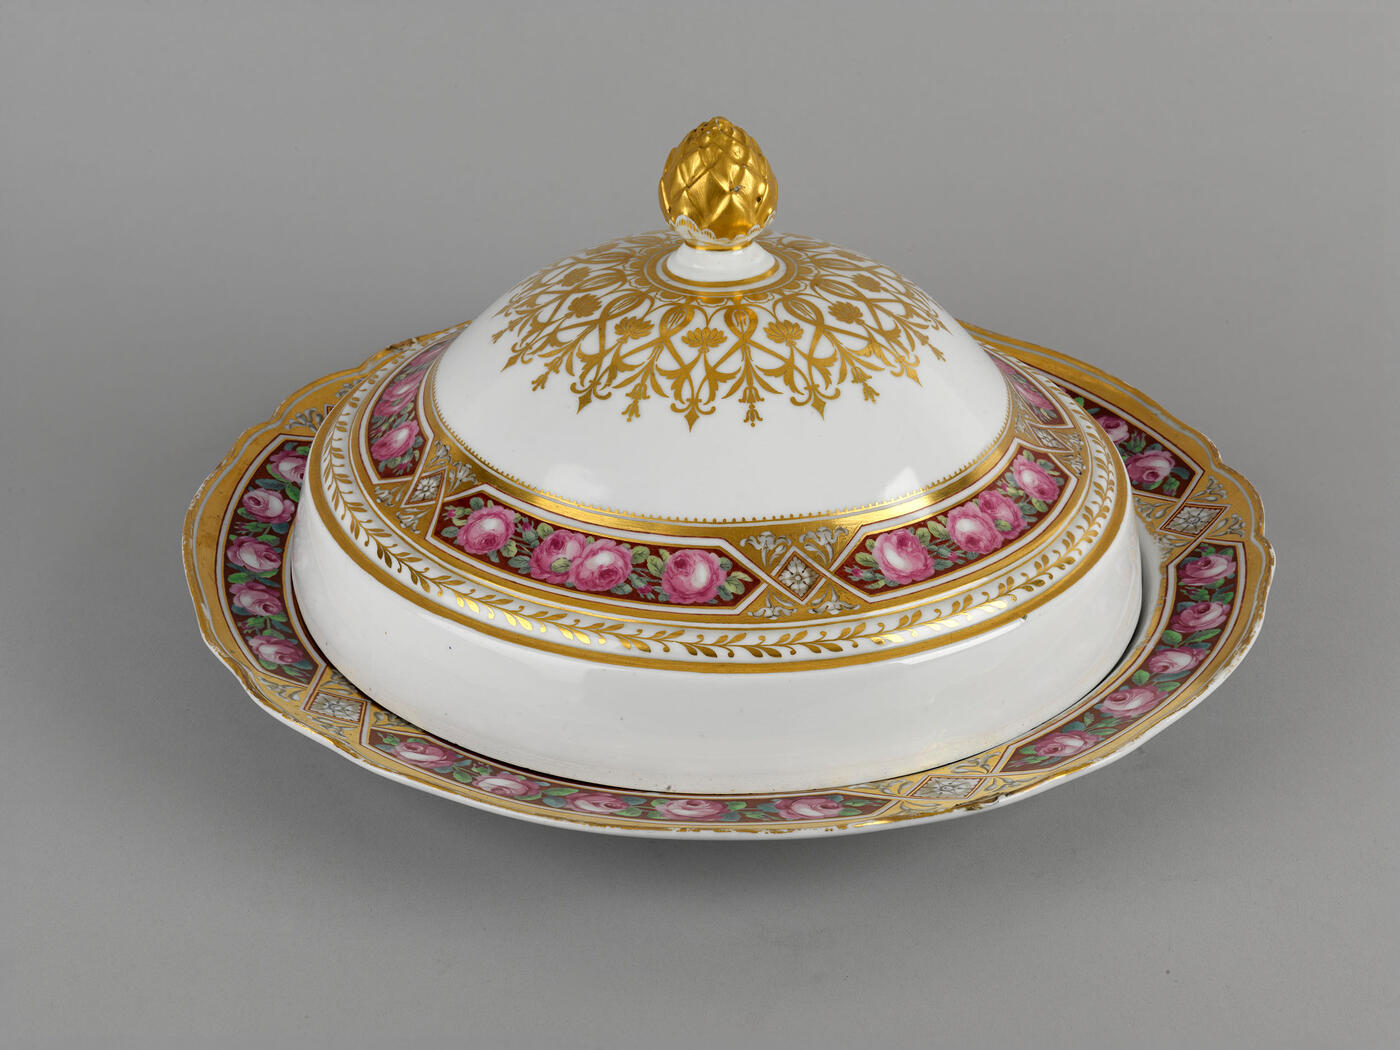 IMPERIAL PORCELAIN MANUFACTORY, PERIOD OF ALEXANDER I (1801-1825)